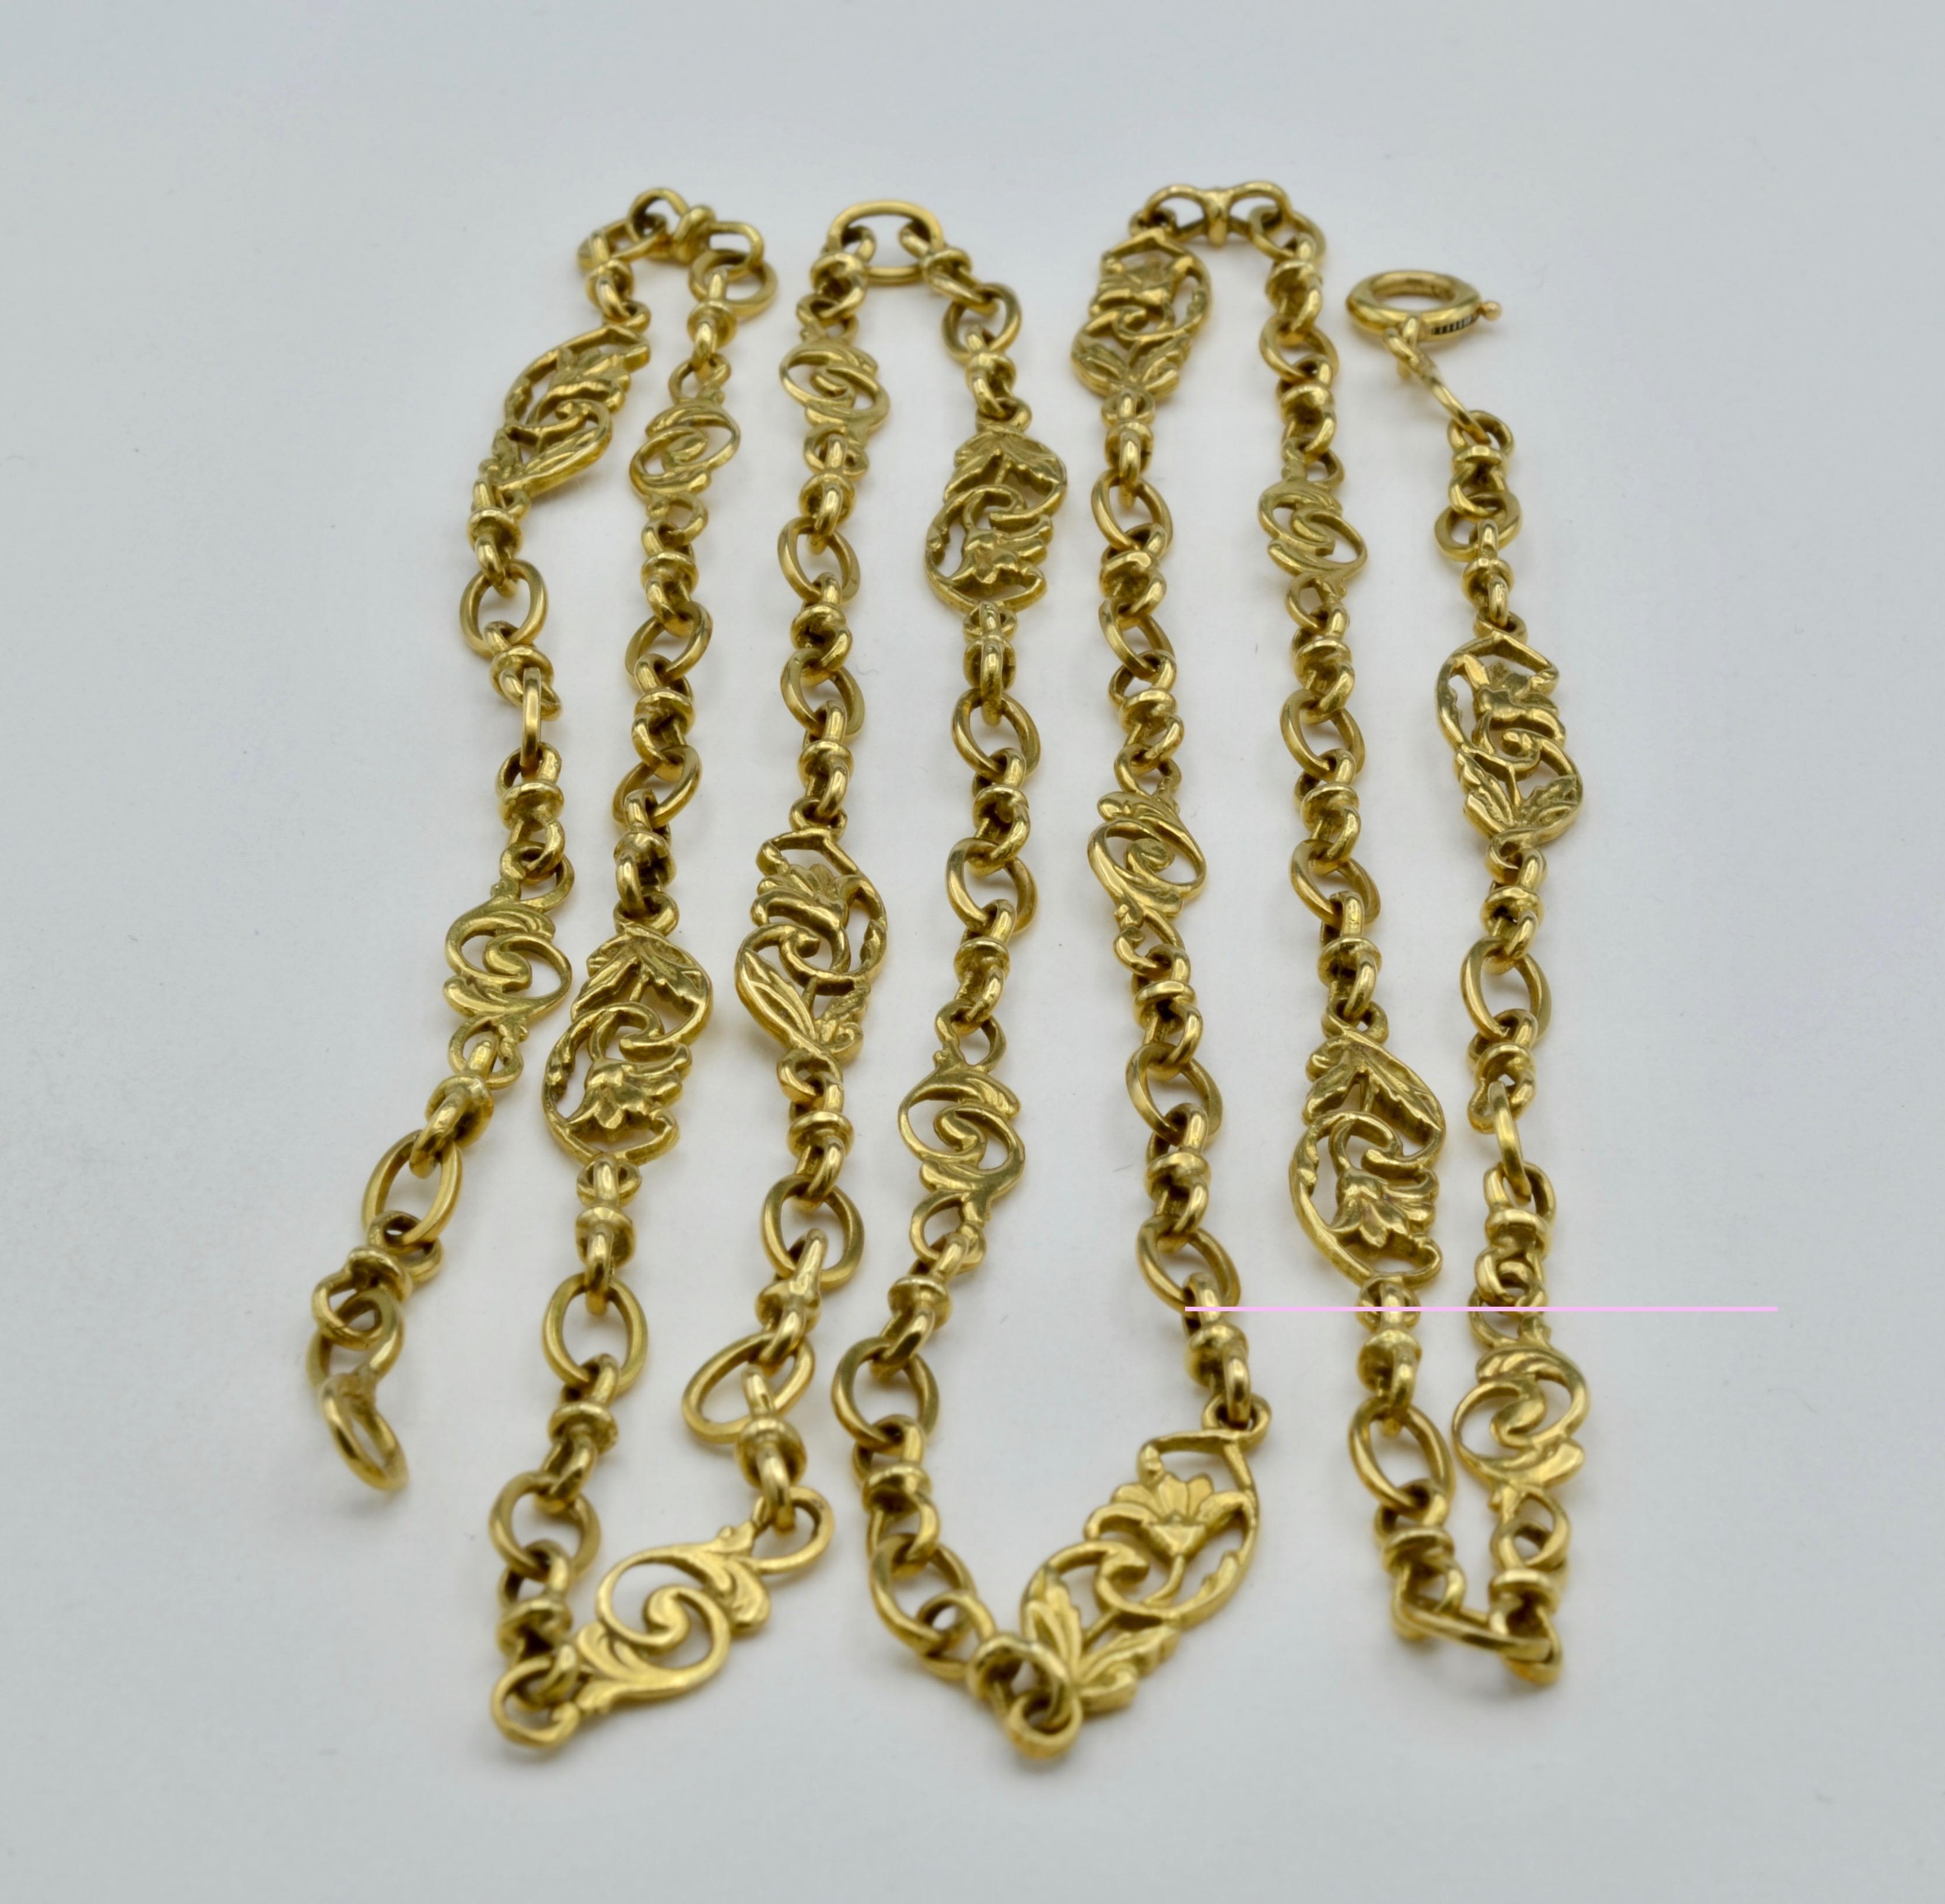 Women's or Men's French Antique Sautoir Yellow Gold Chain Link Necklace with Lillies and Vines